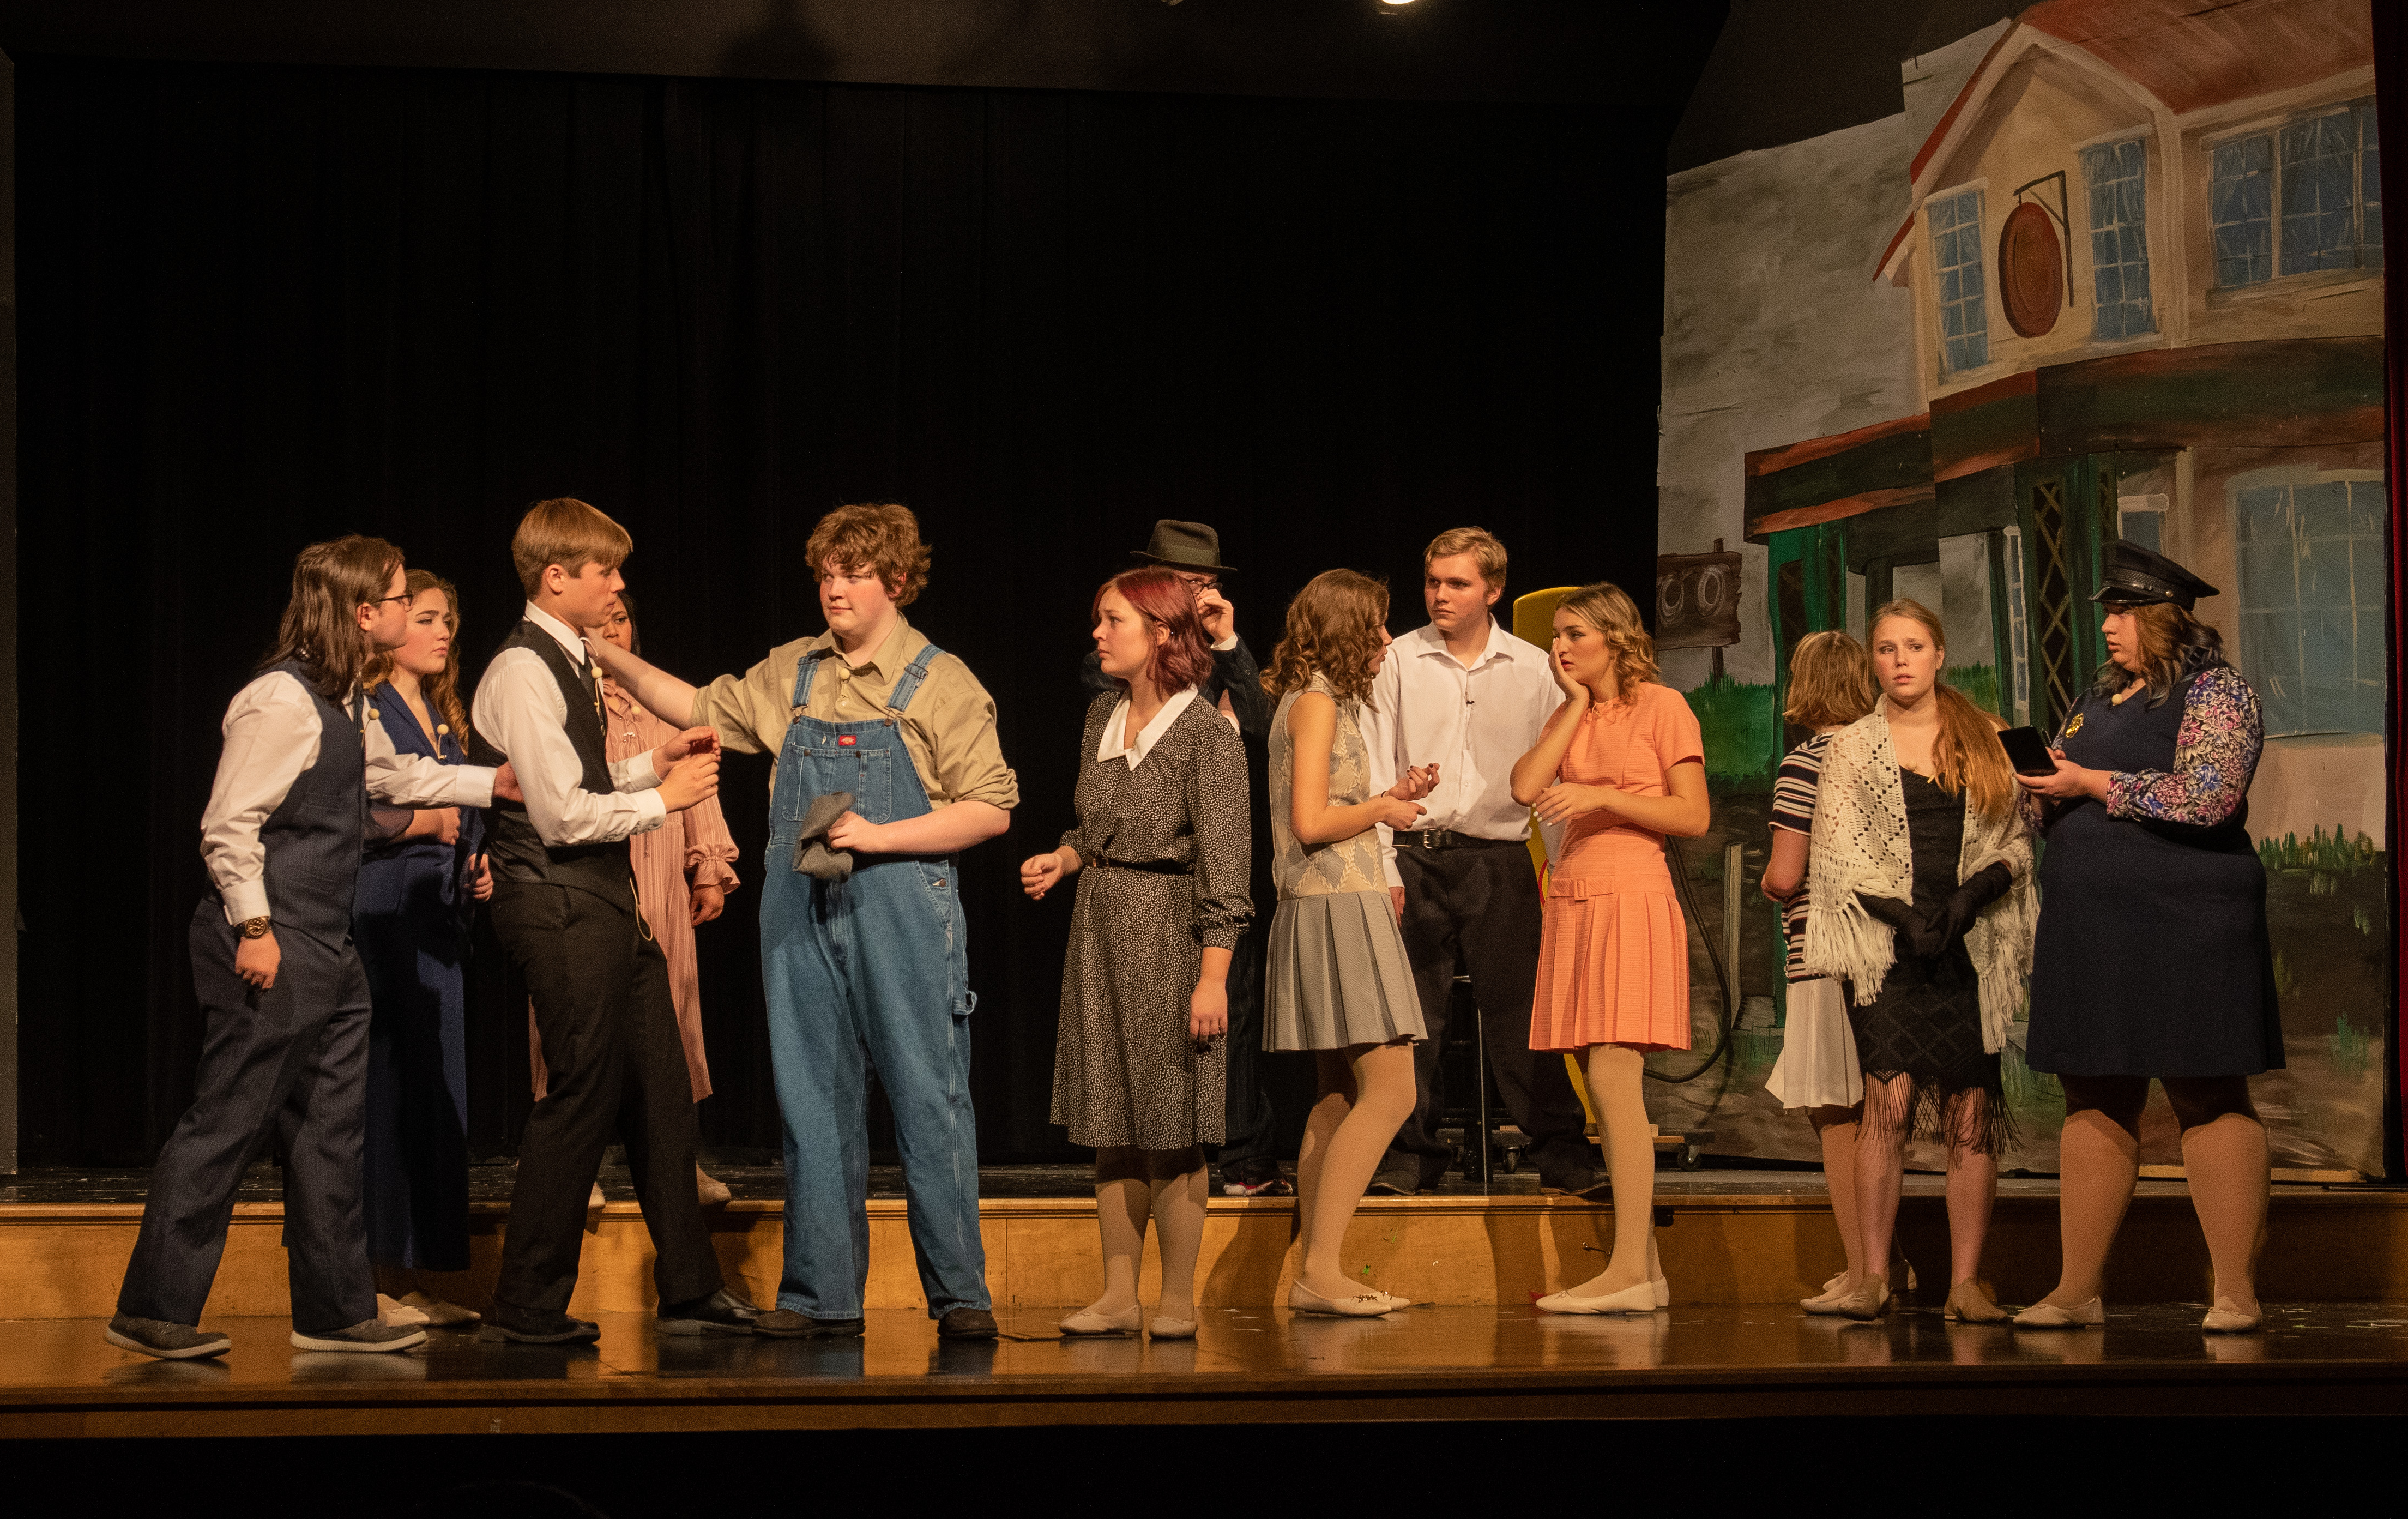 The great gatsby senior high play photo of multiple students in costume